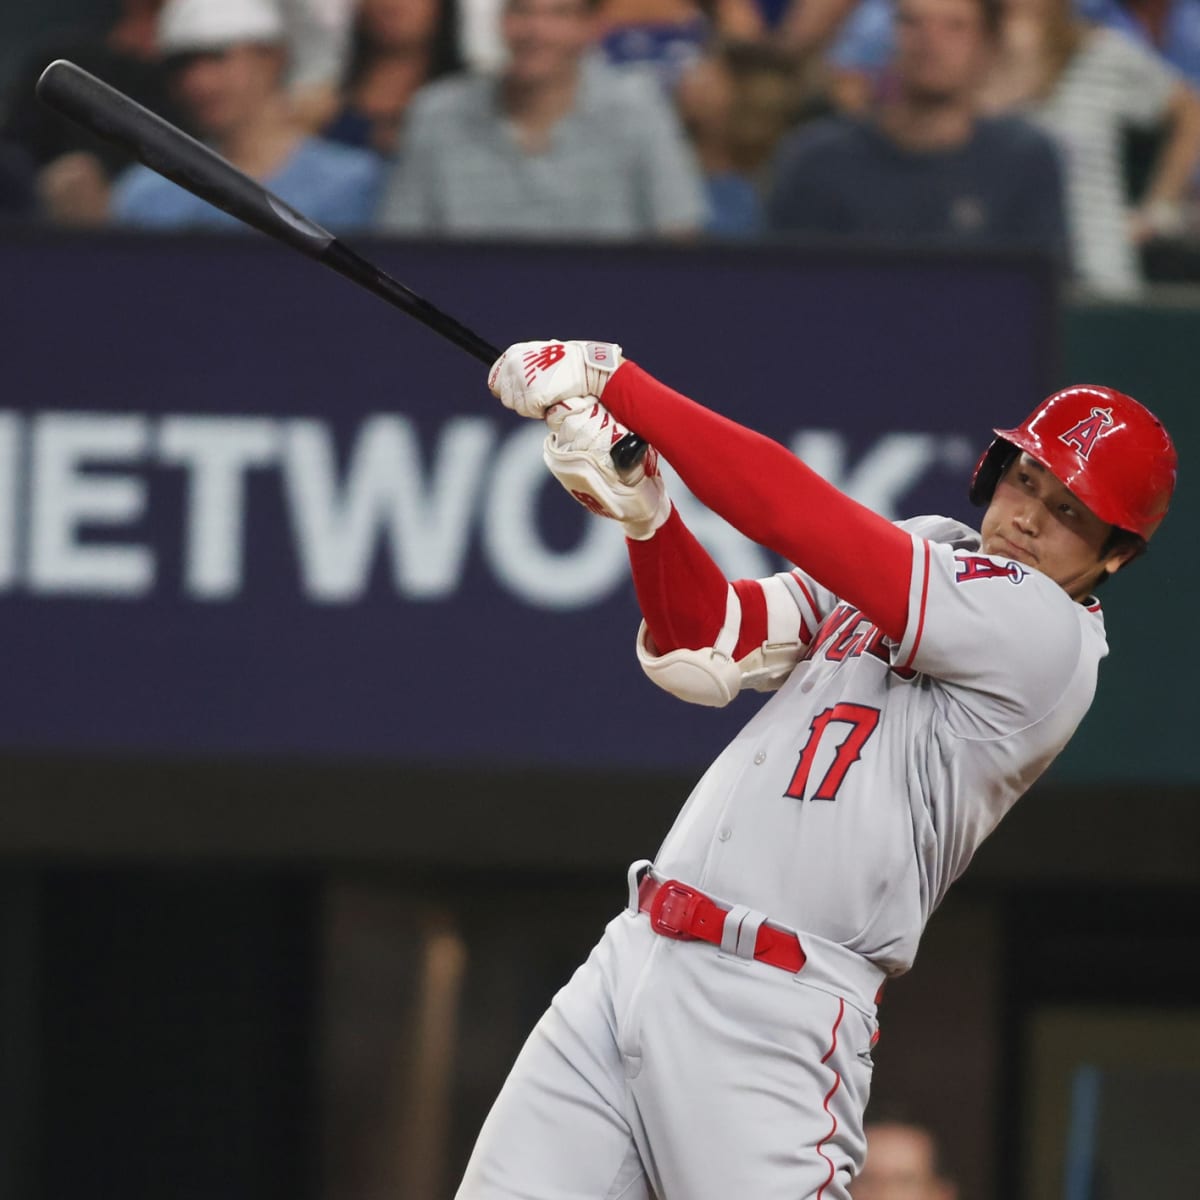 Shohei Ohtani voted player of the year by fellow major leaguers